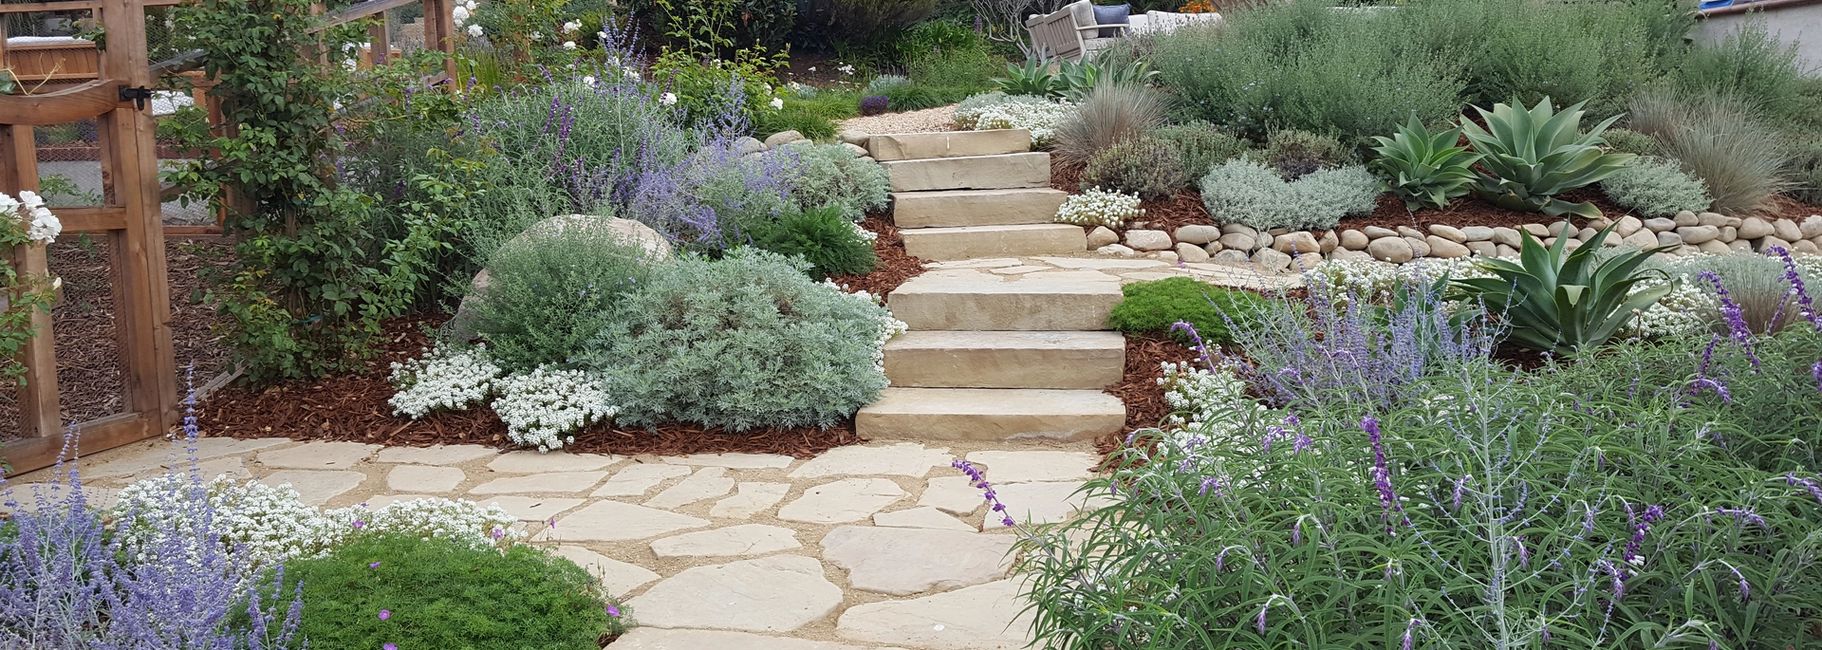 Drought tolerant landscaping using imported stone and water wise plants